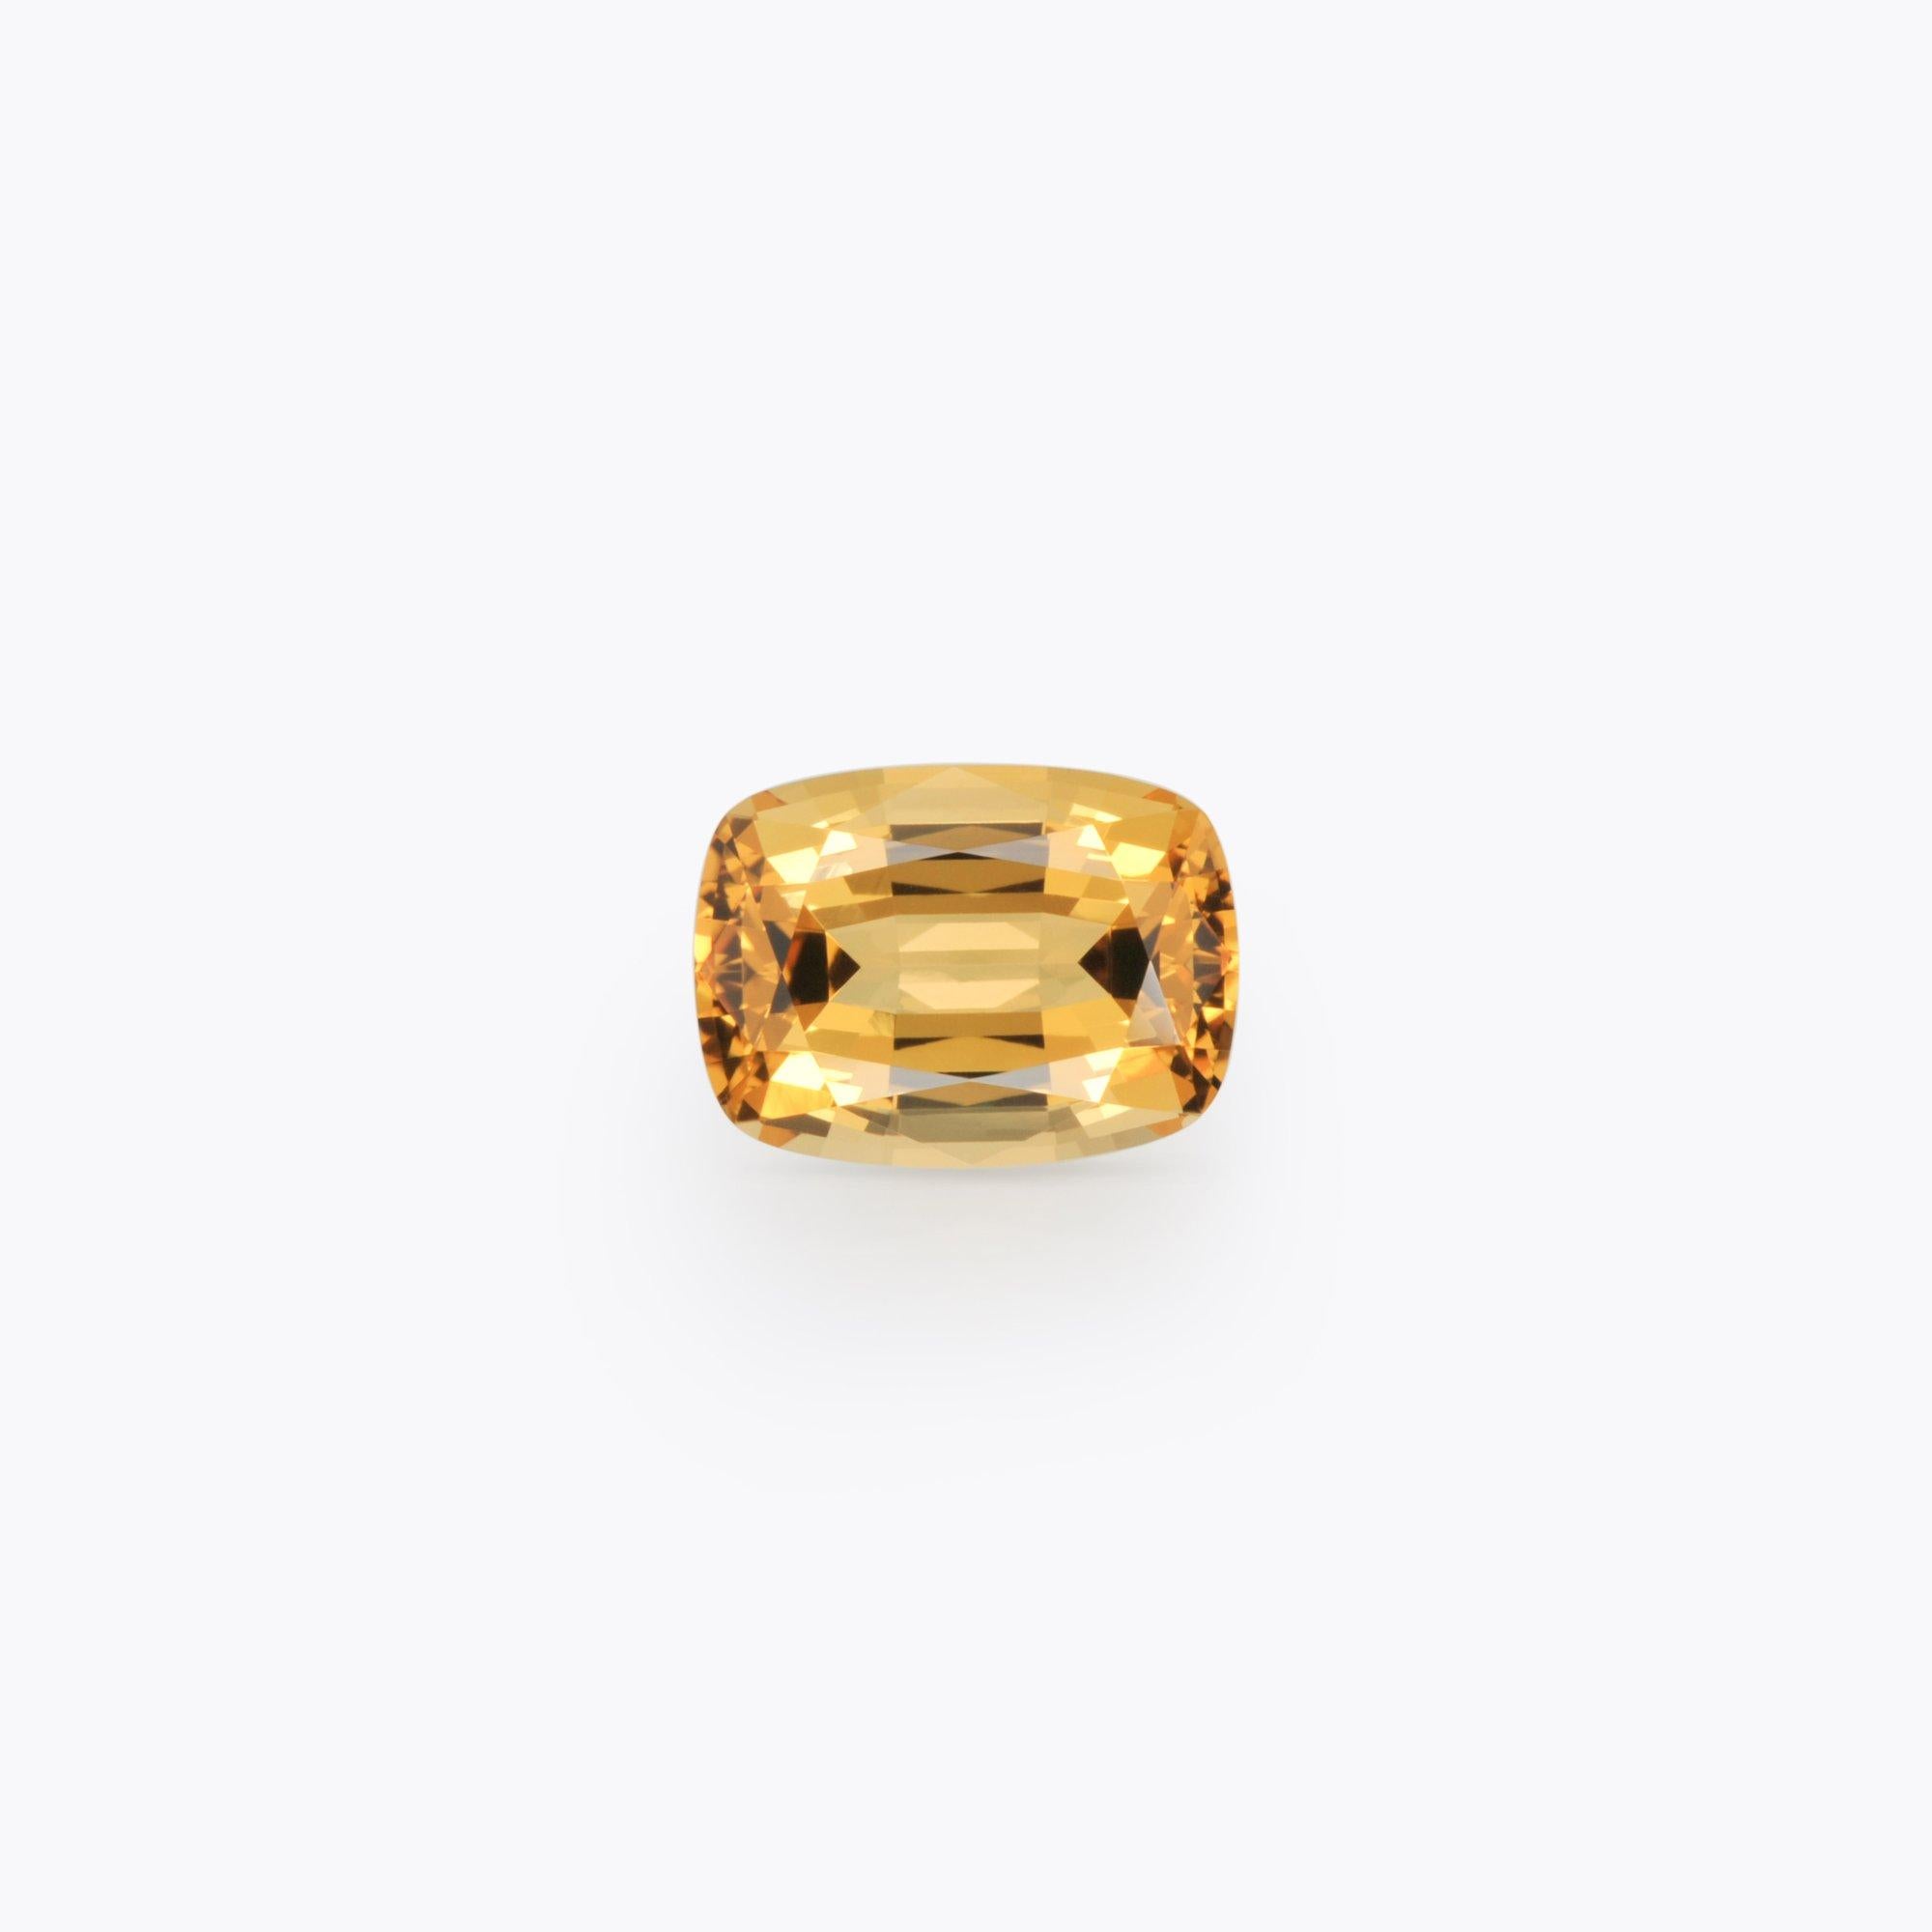 Superb 5.14 carat Precious Brazilian Imperial Topaz cushion gemstone, offered loose to a gems lover.
Returns are accepted and paid by us within 7 days of delivery.
We offer supreme custom jewelry work upon request. Please contact us for more